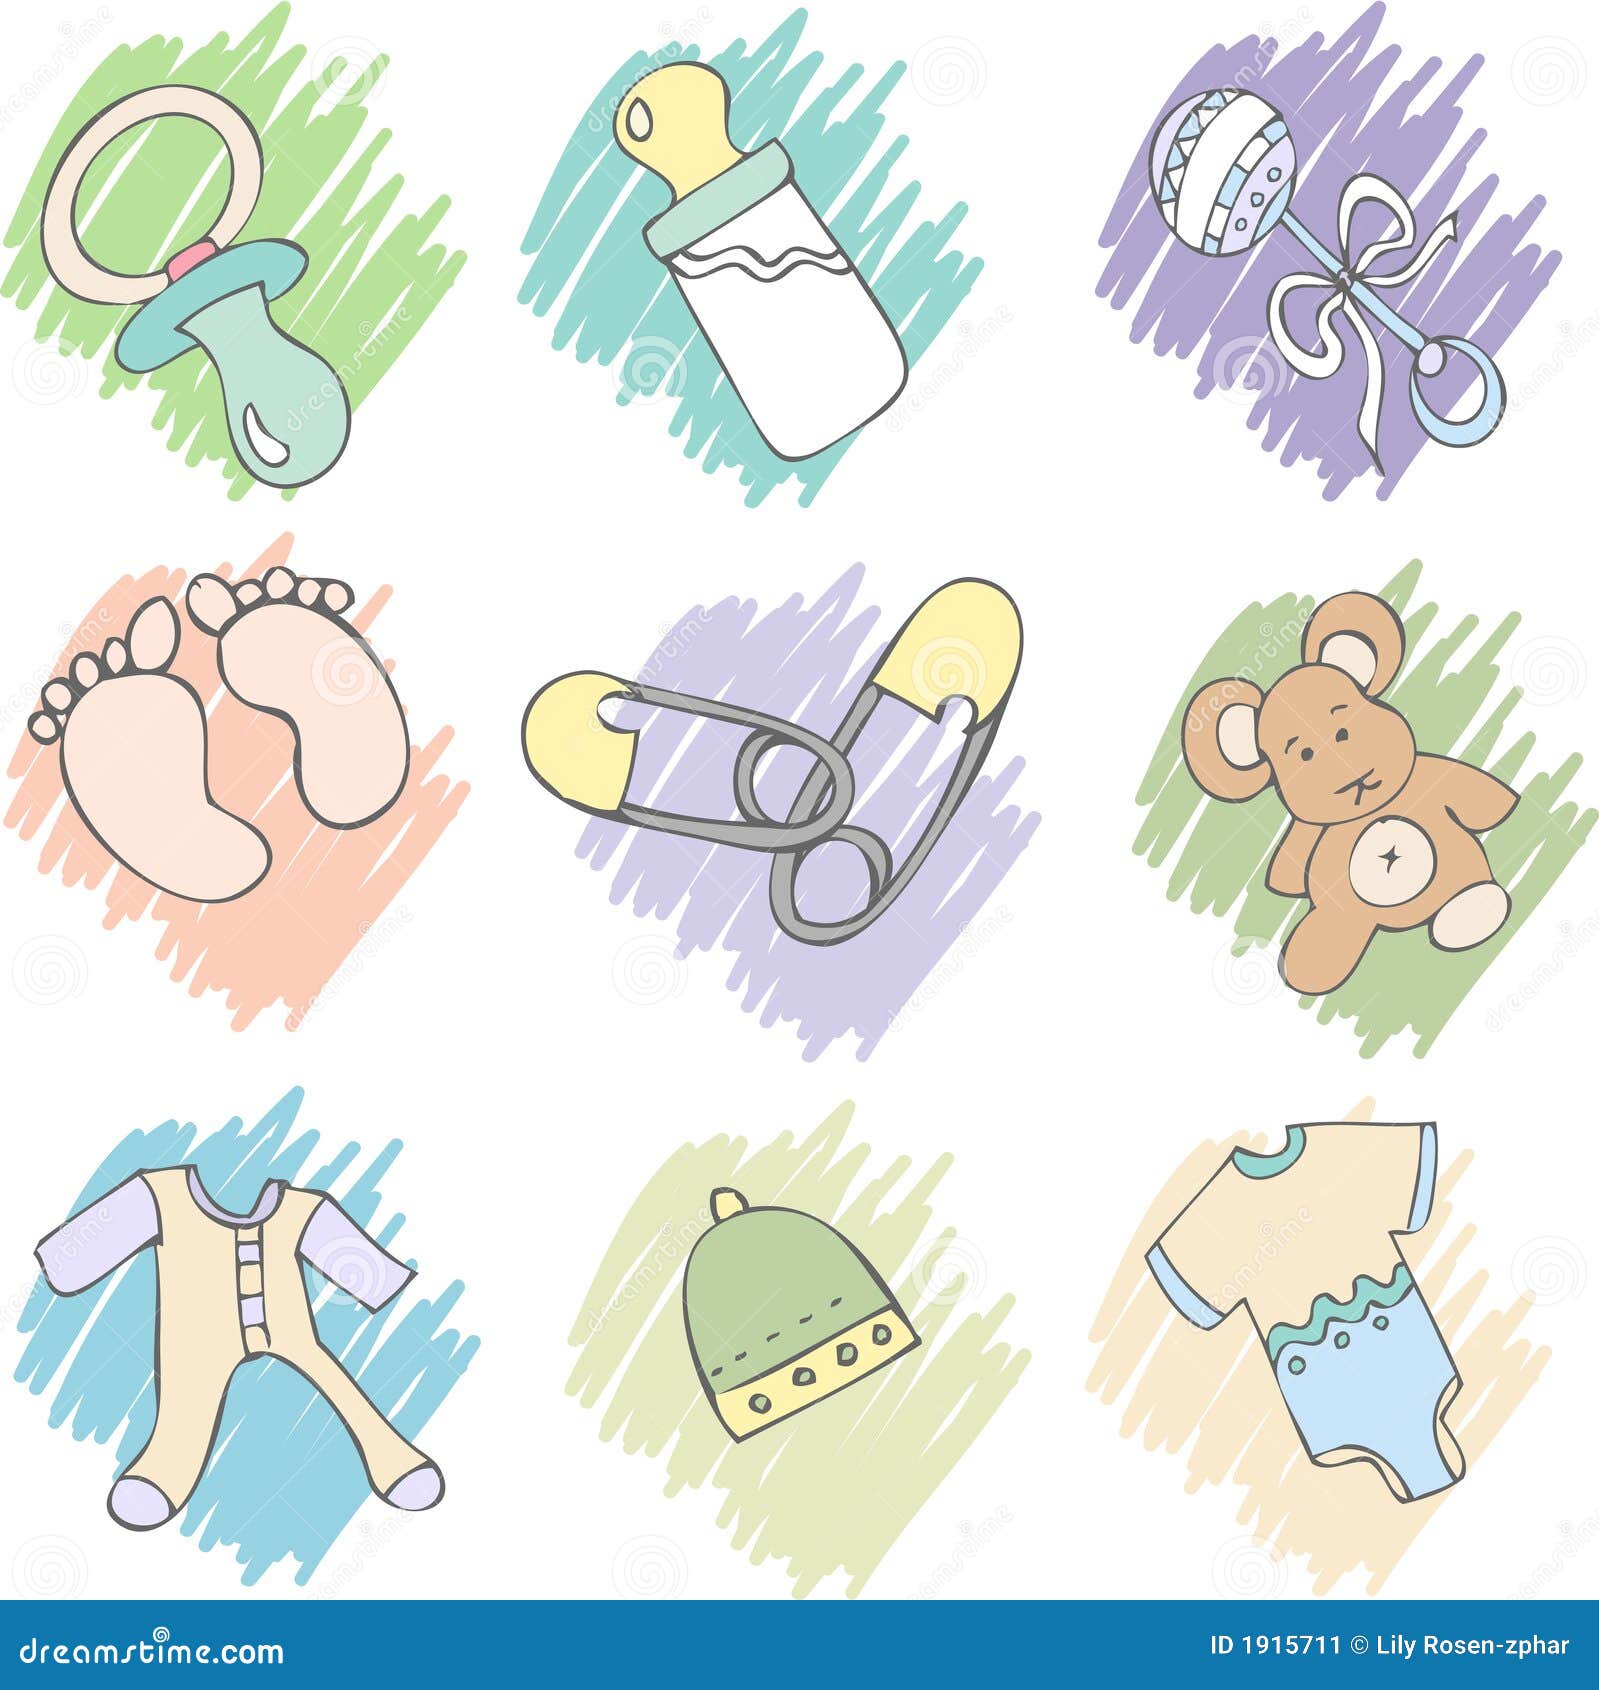 Baby Items Stock Image - Image: 1915711